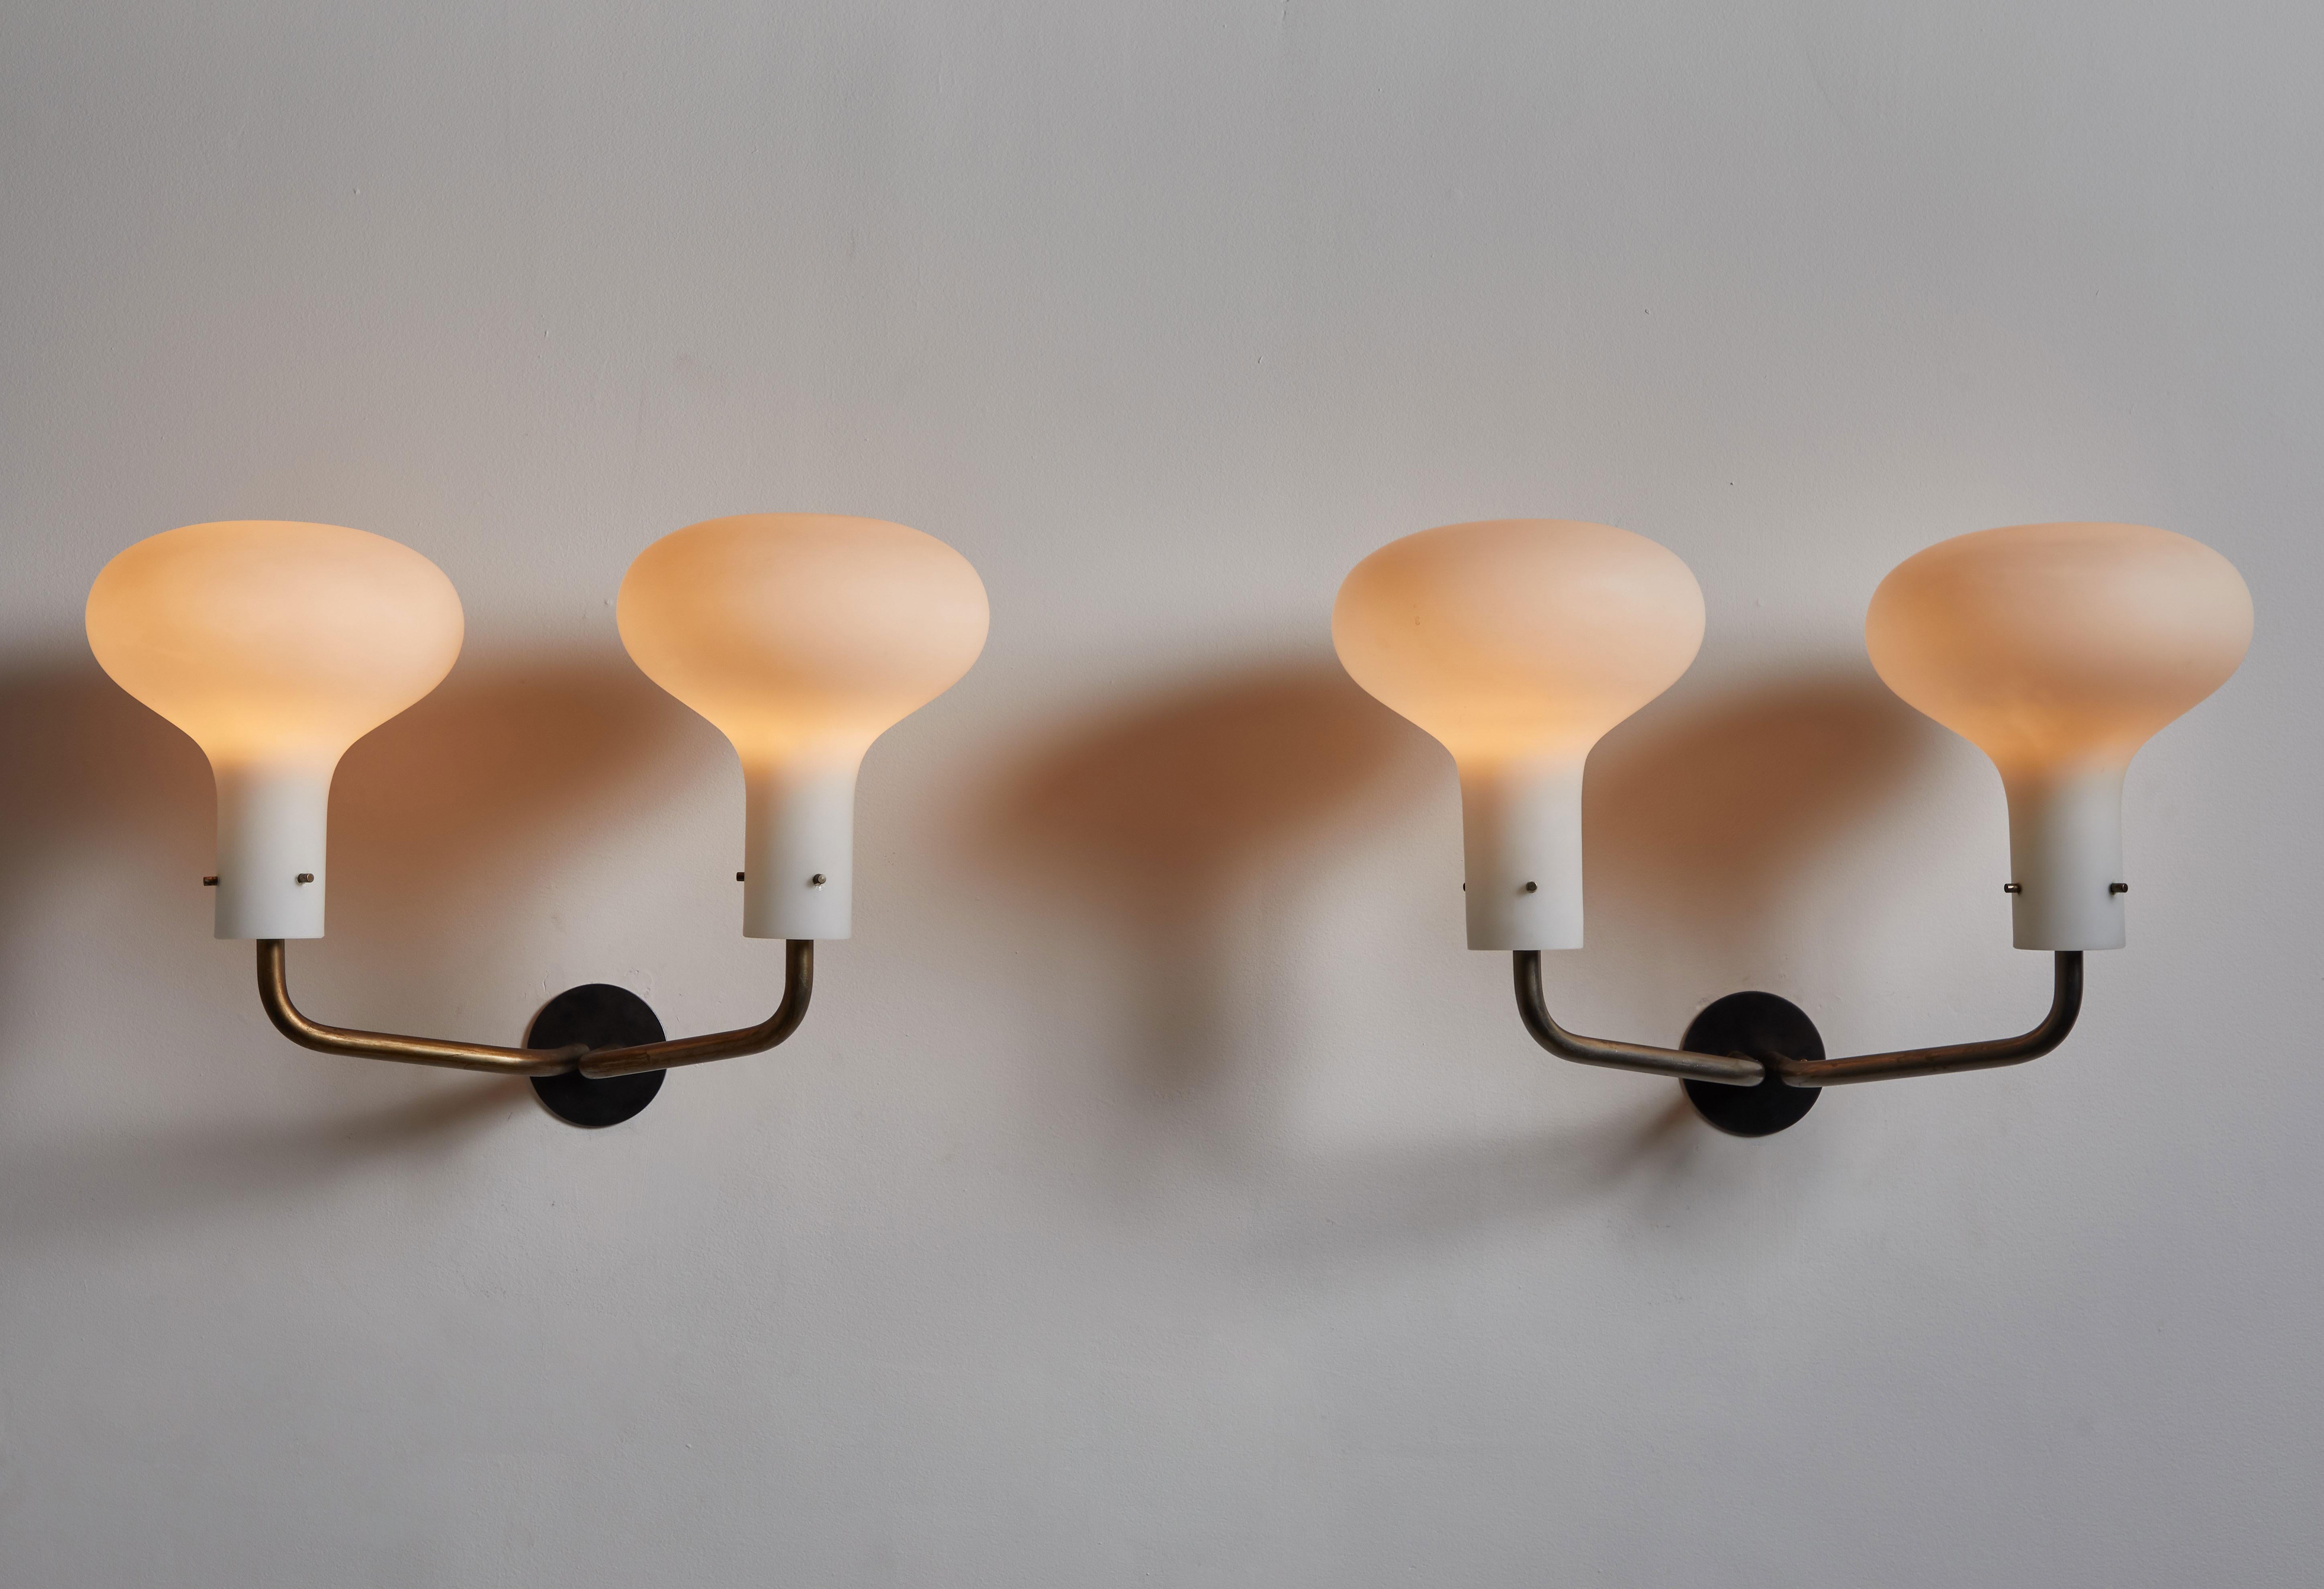 Pair of double-arm model Lp12 galleria sconces by Ignazio Gardella for Azucena. Designed and manufactured in Italy, 1958. Brass and brushed satin glass diffusers. Rewired for US junction boxes. Each light takes one E27 75w maximum bulb.